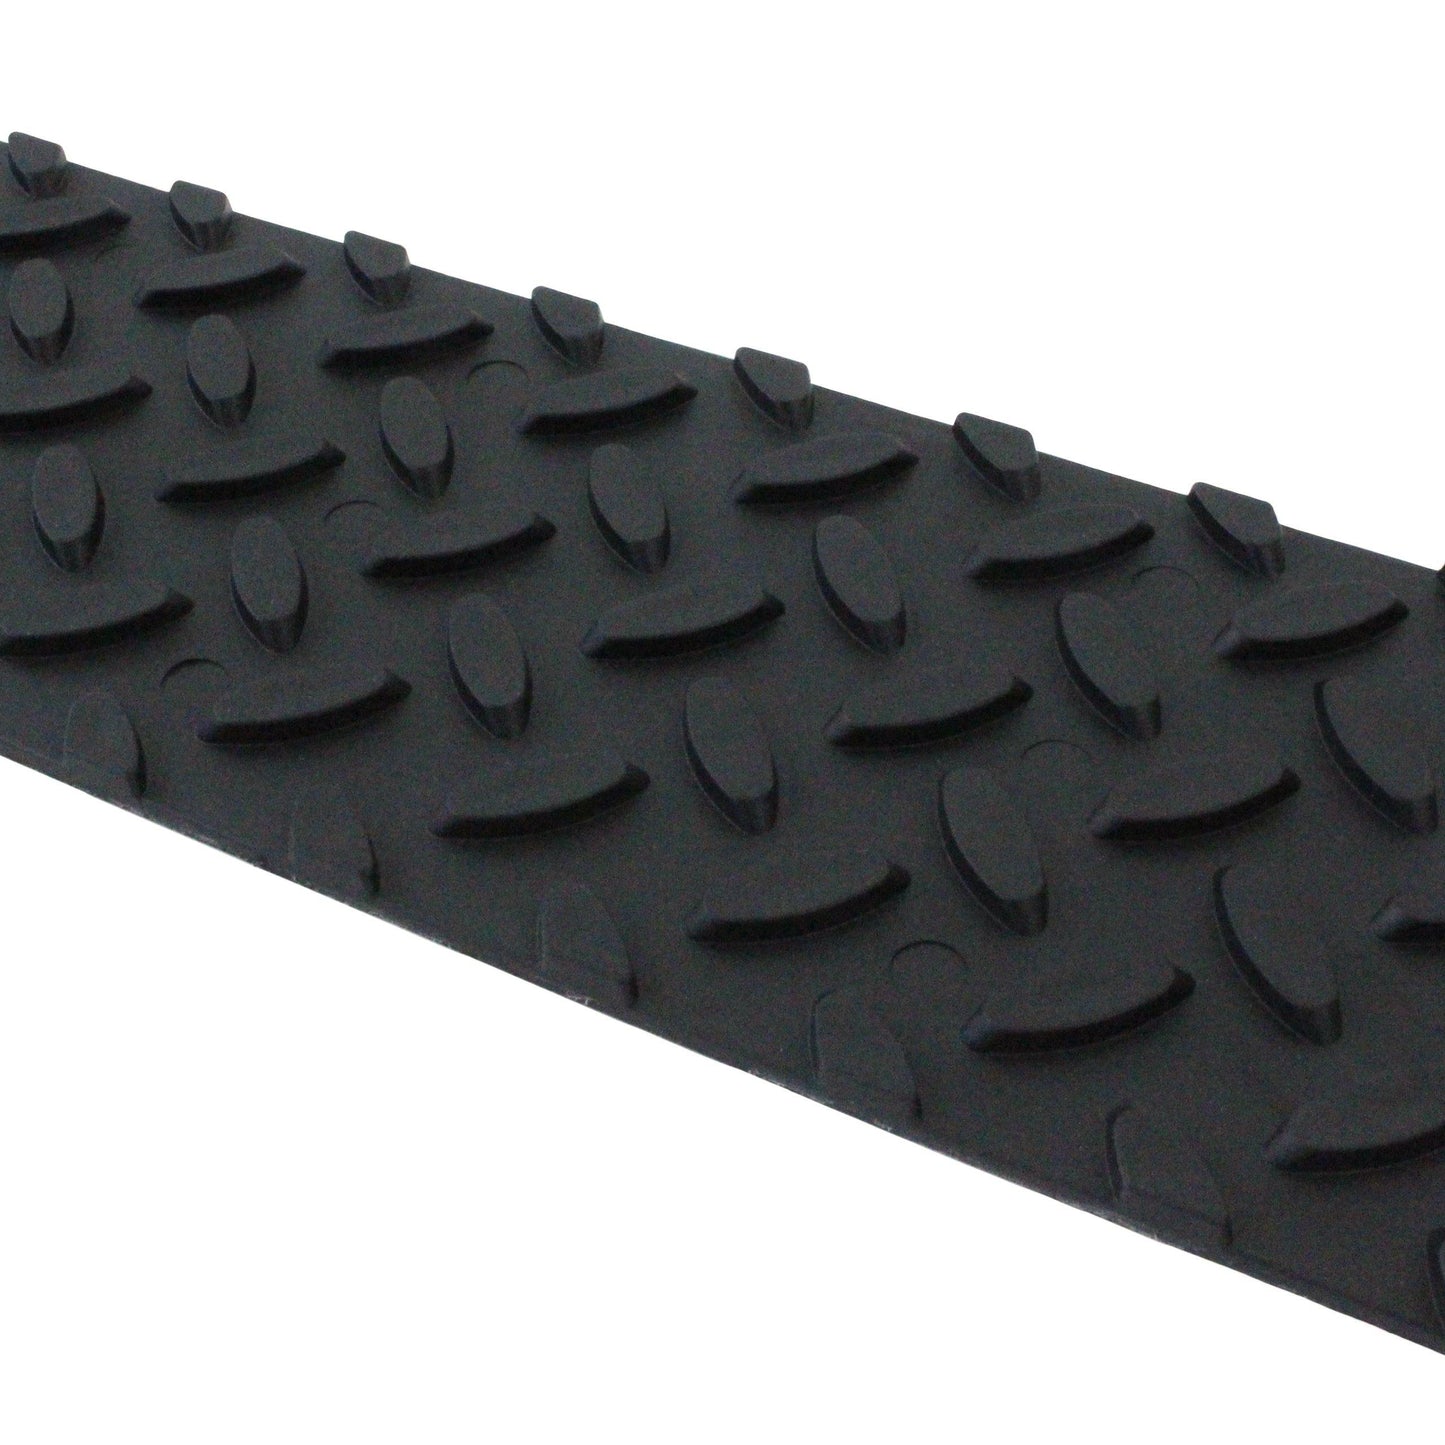 Self-Adhesive Safety Step Surface - Boxer Tools